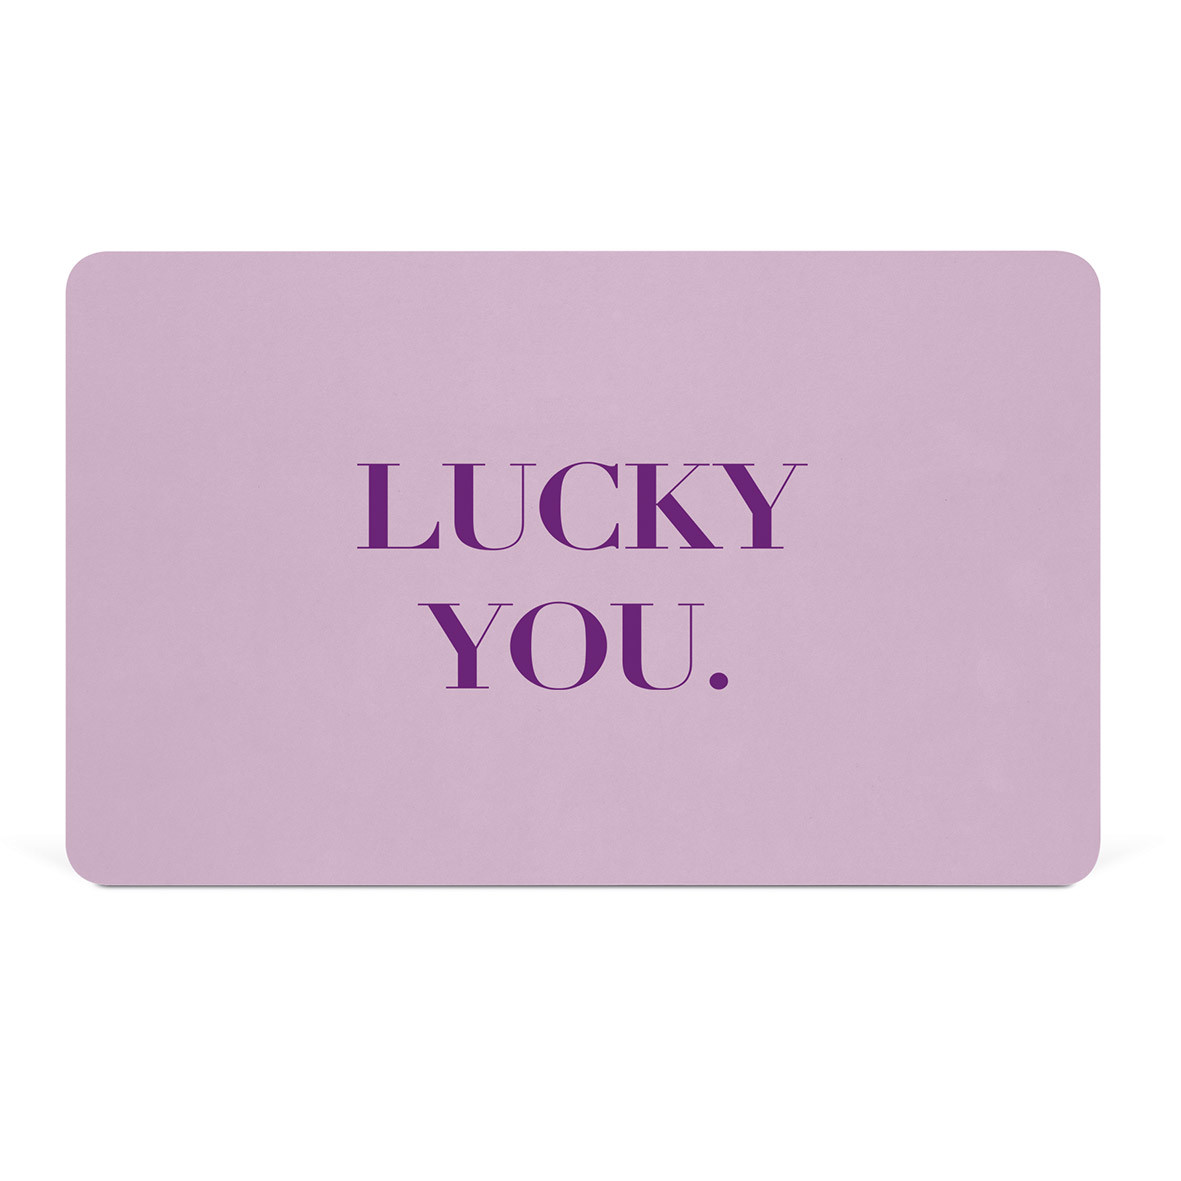 Lucky You. D@H Tray